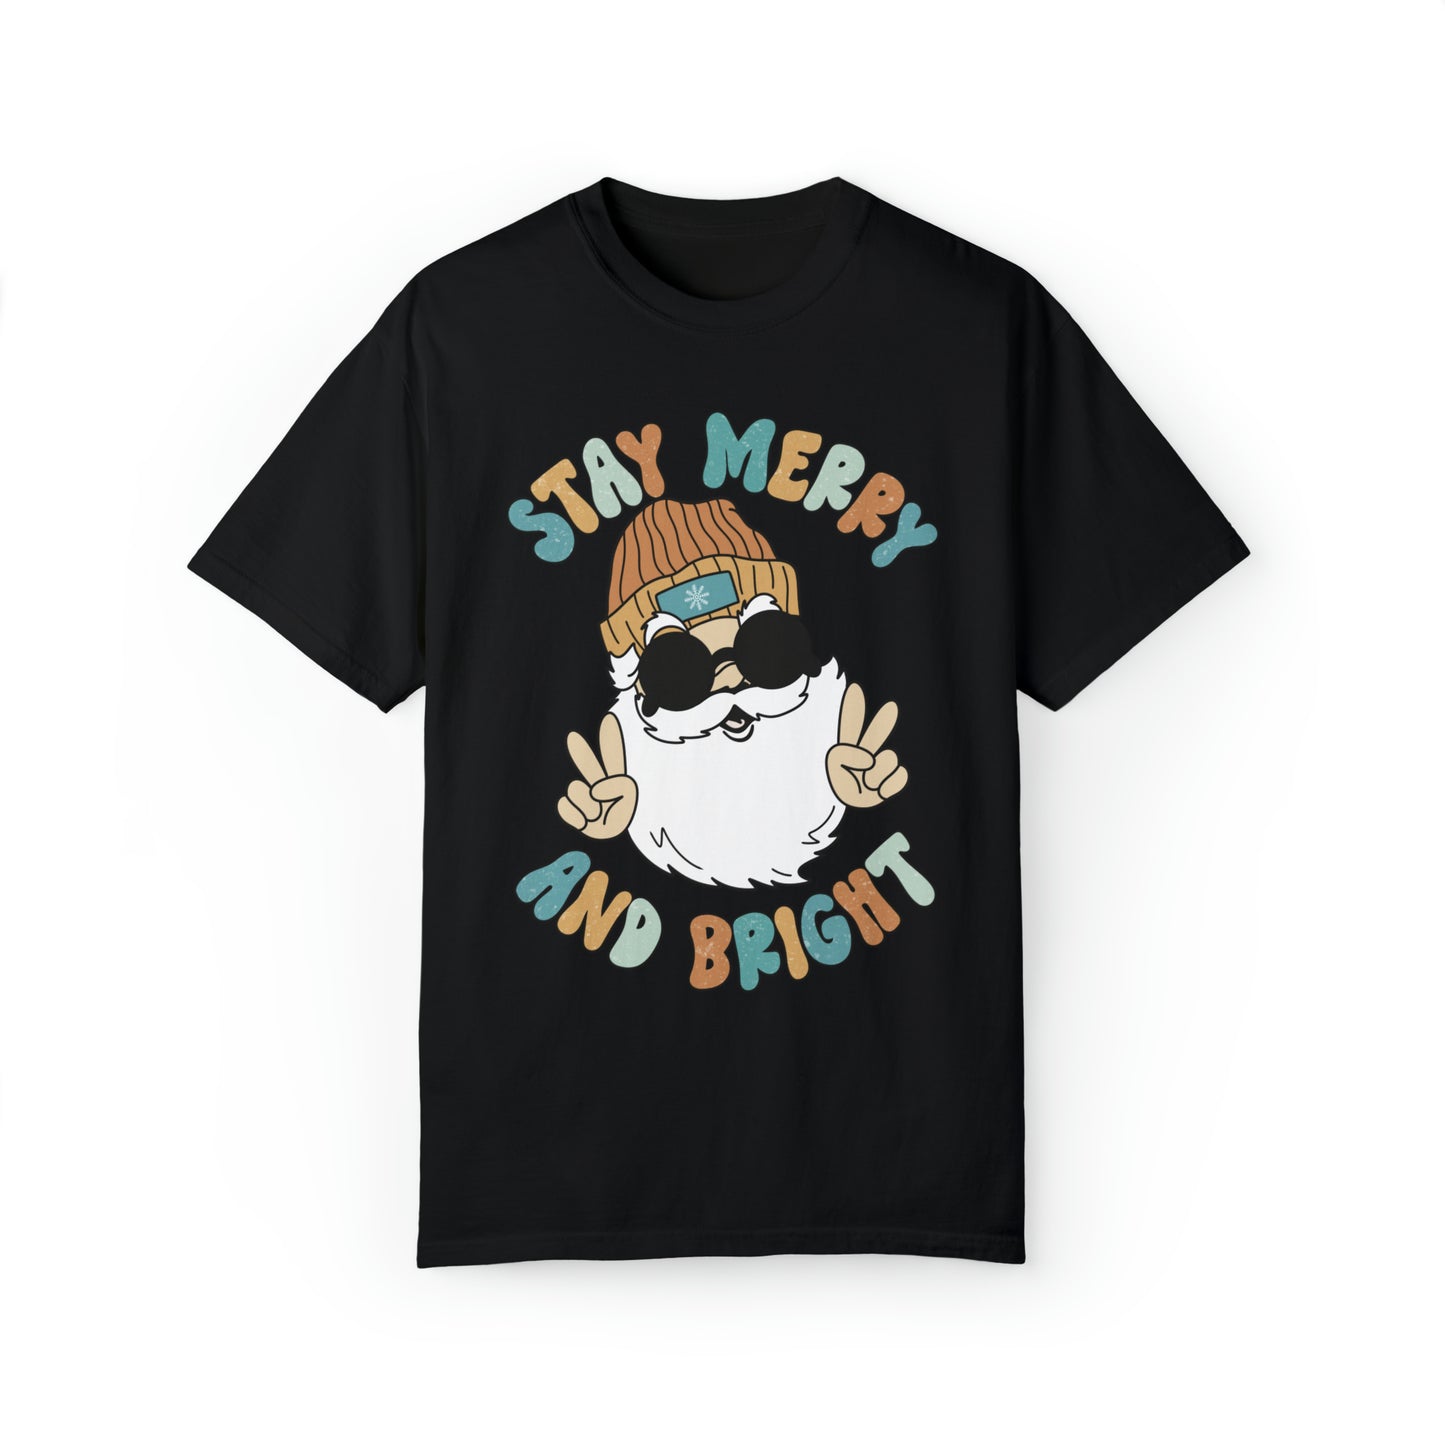 Stay Merry and Bright Shirt